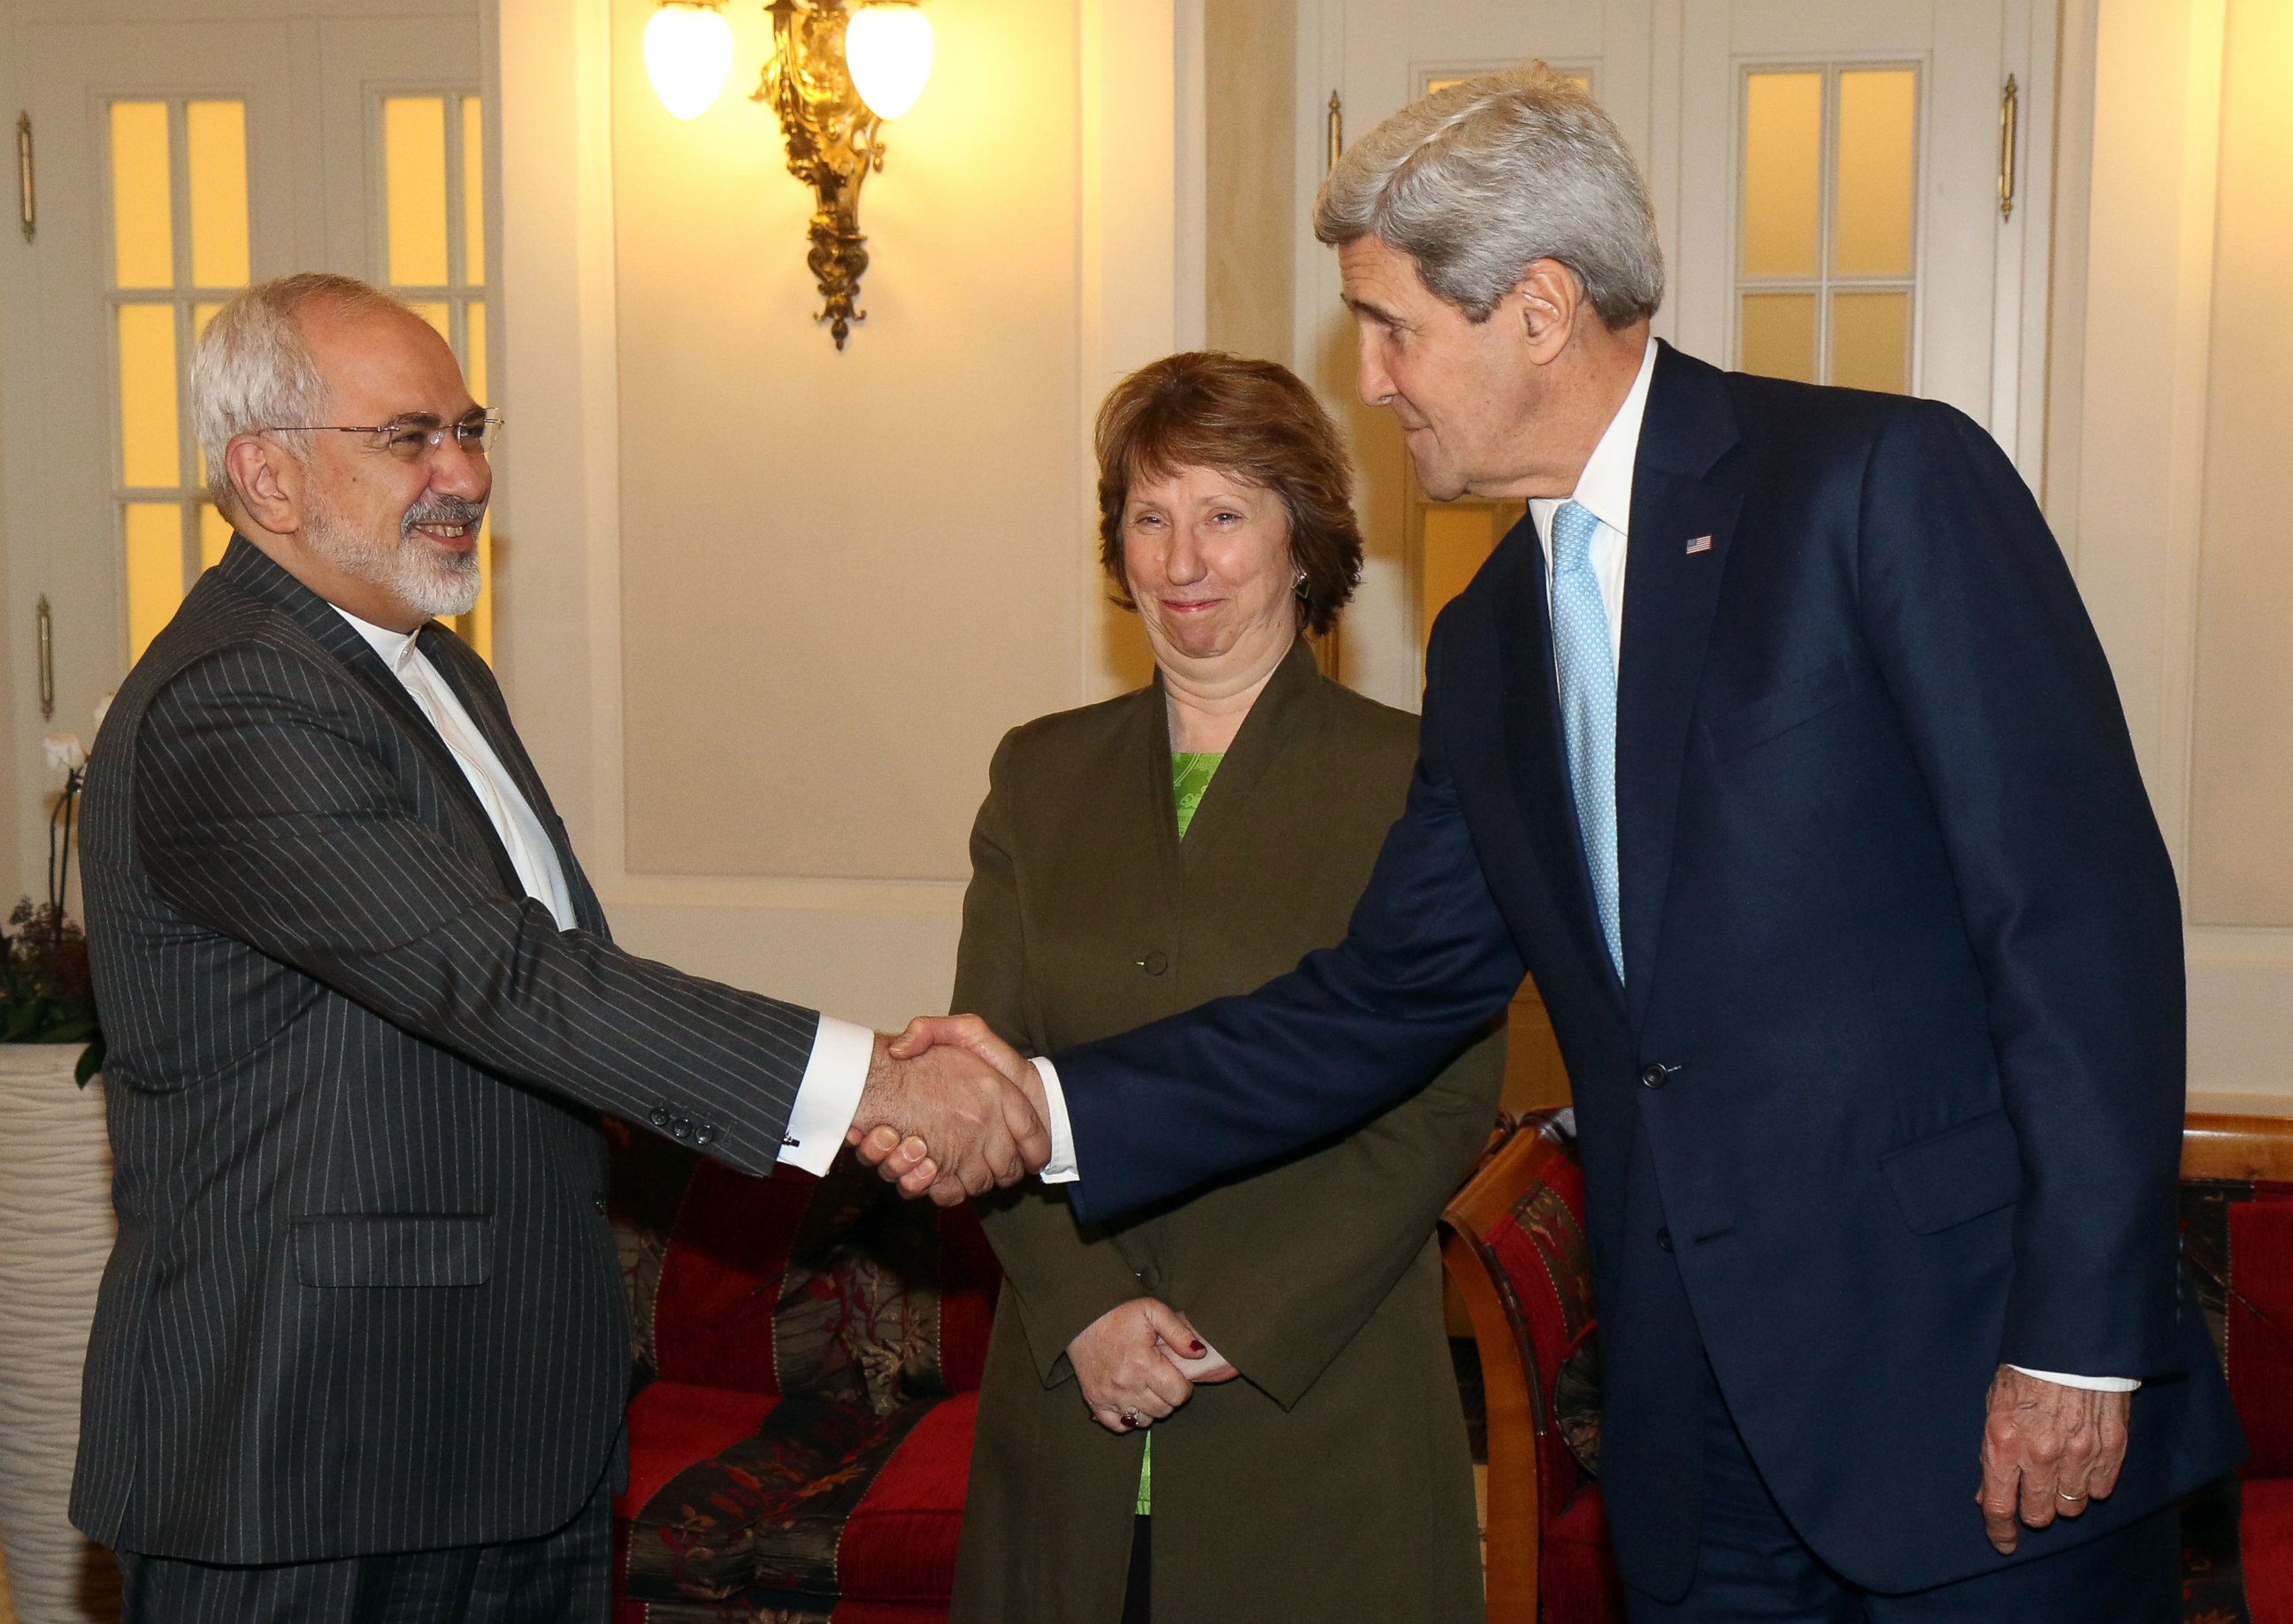 PHOTO: Iranian Foreign Minister Mohammad Javad Zarif shakes hands with U.S. Secretary of State John Kerry as former EU foreign policy chief Catherine Ashton looks prior to closed-door nuclear talks with Iran in Vienna, Austria, Nov. 20, 2014.